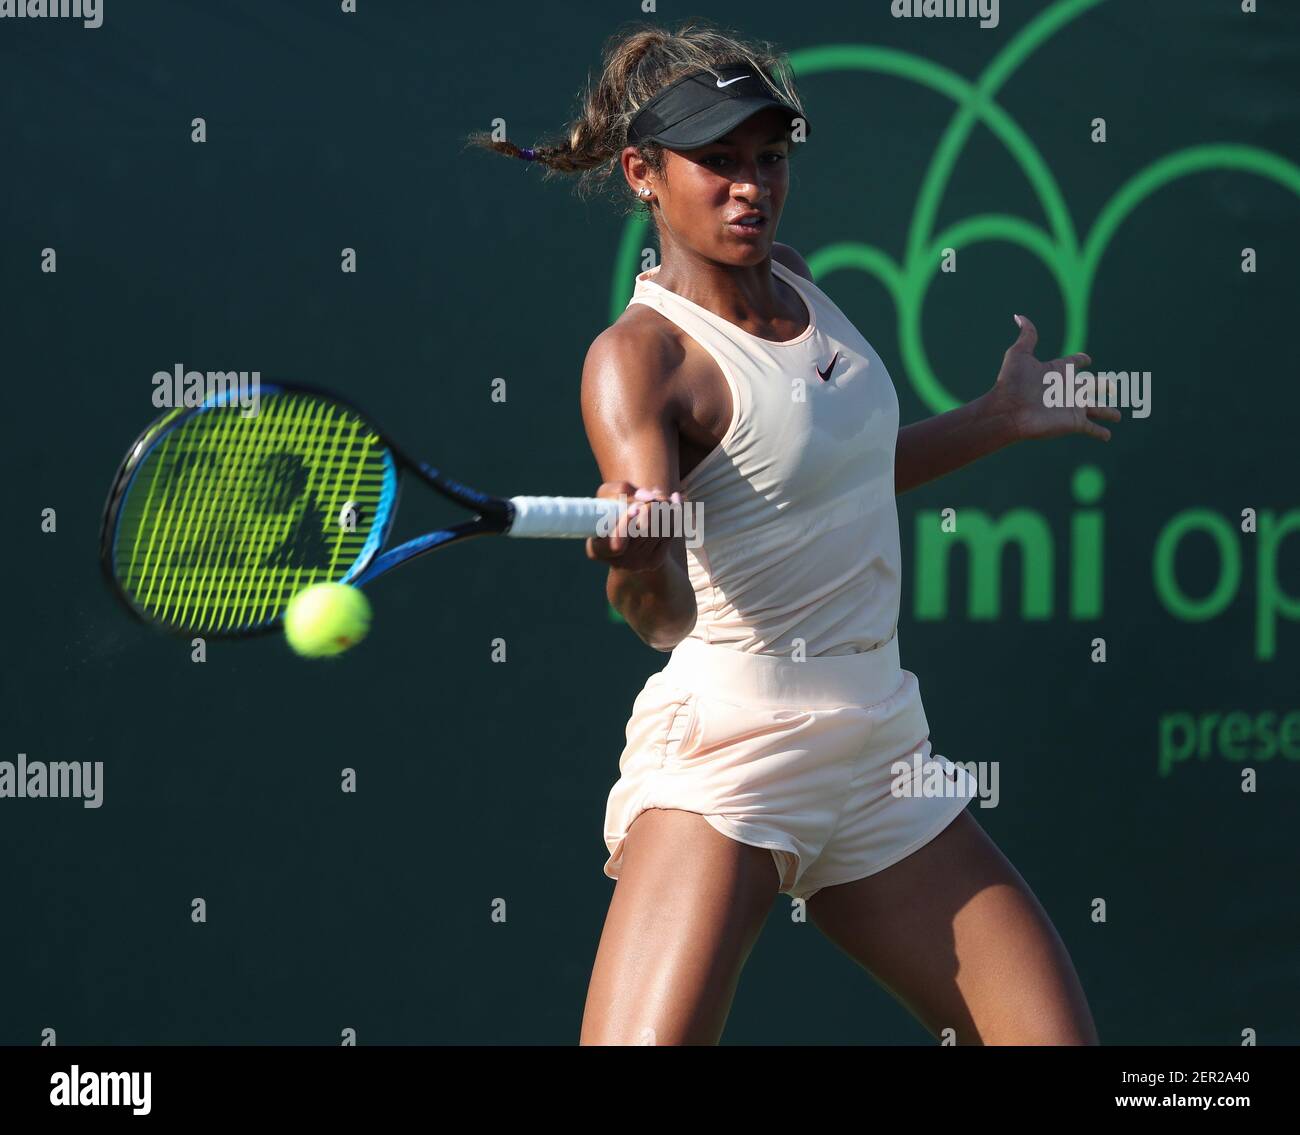 March 20, 2018: Whitney Osuigwe from the United States plays a forehand  against Claire Lui from the United States during a qualifying round at the 2018  Miami Open presented by Itau professional